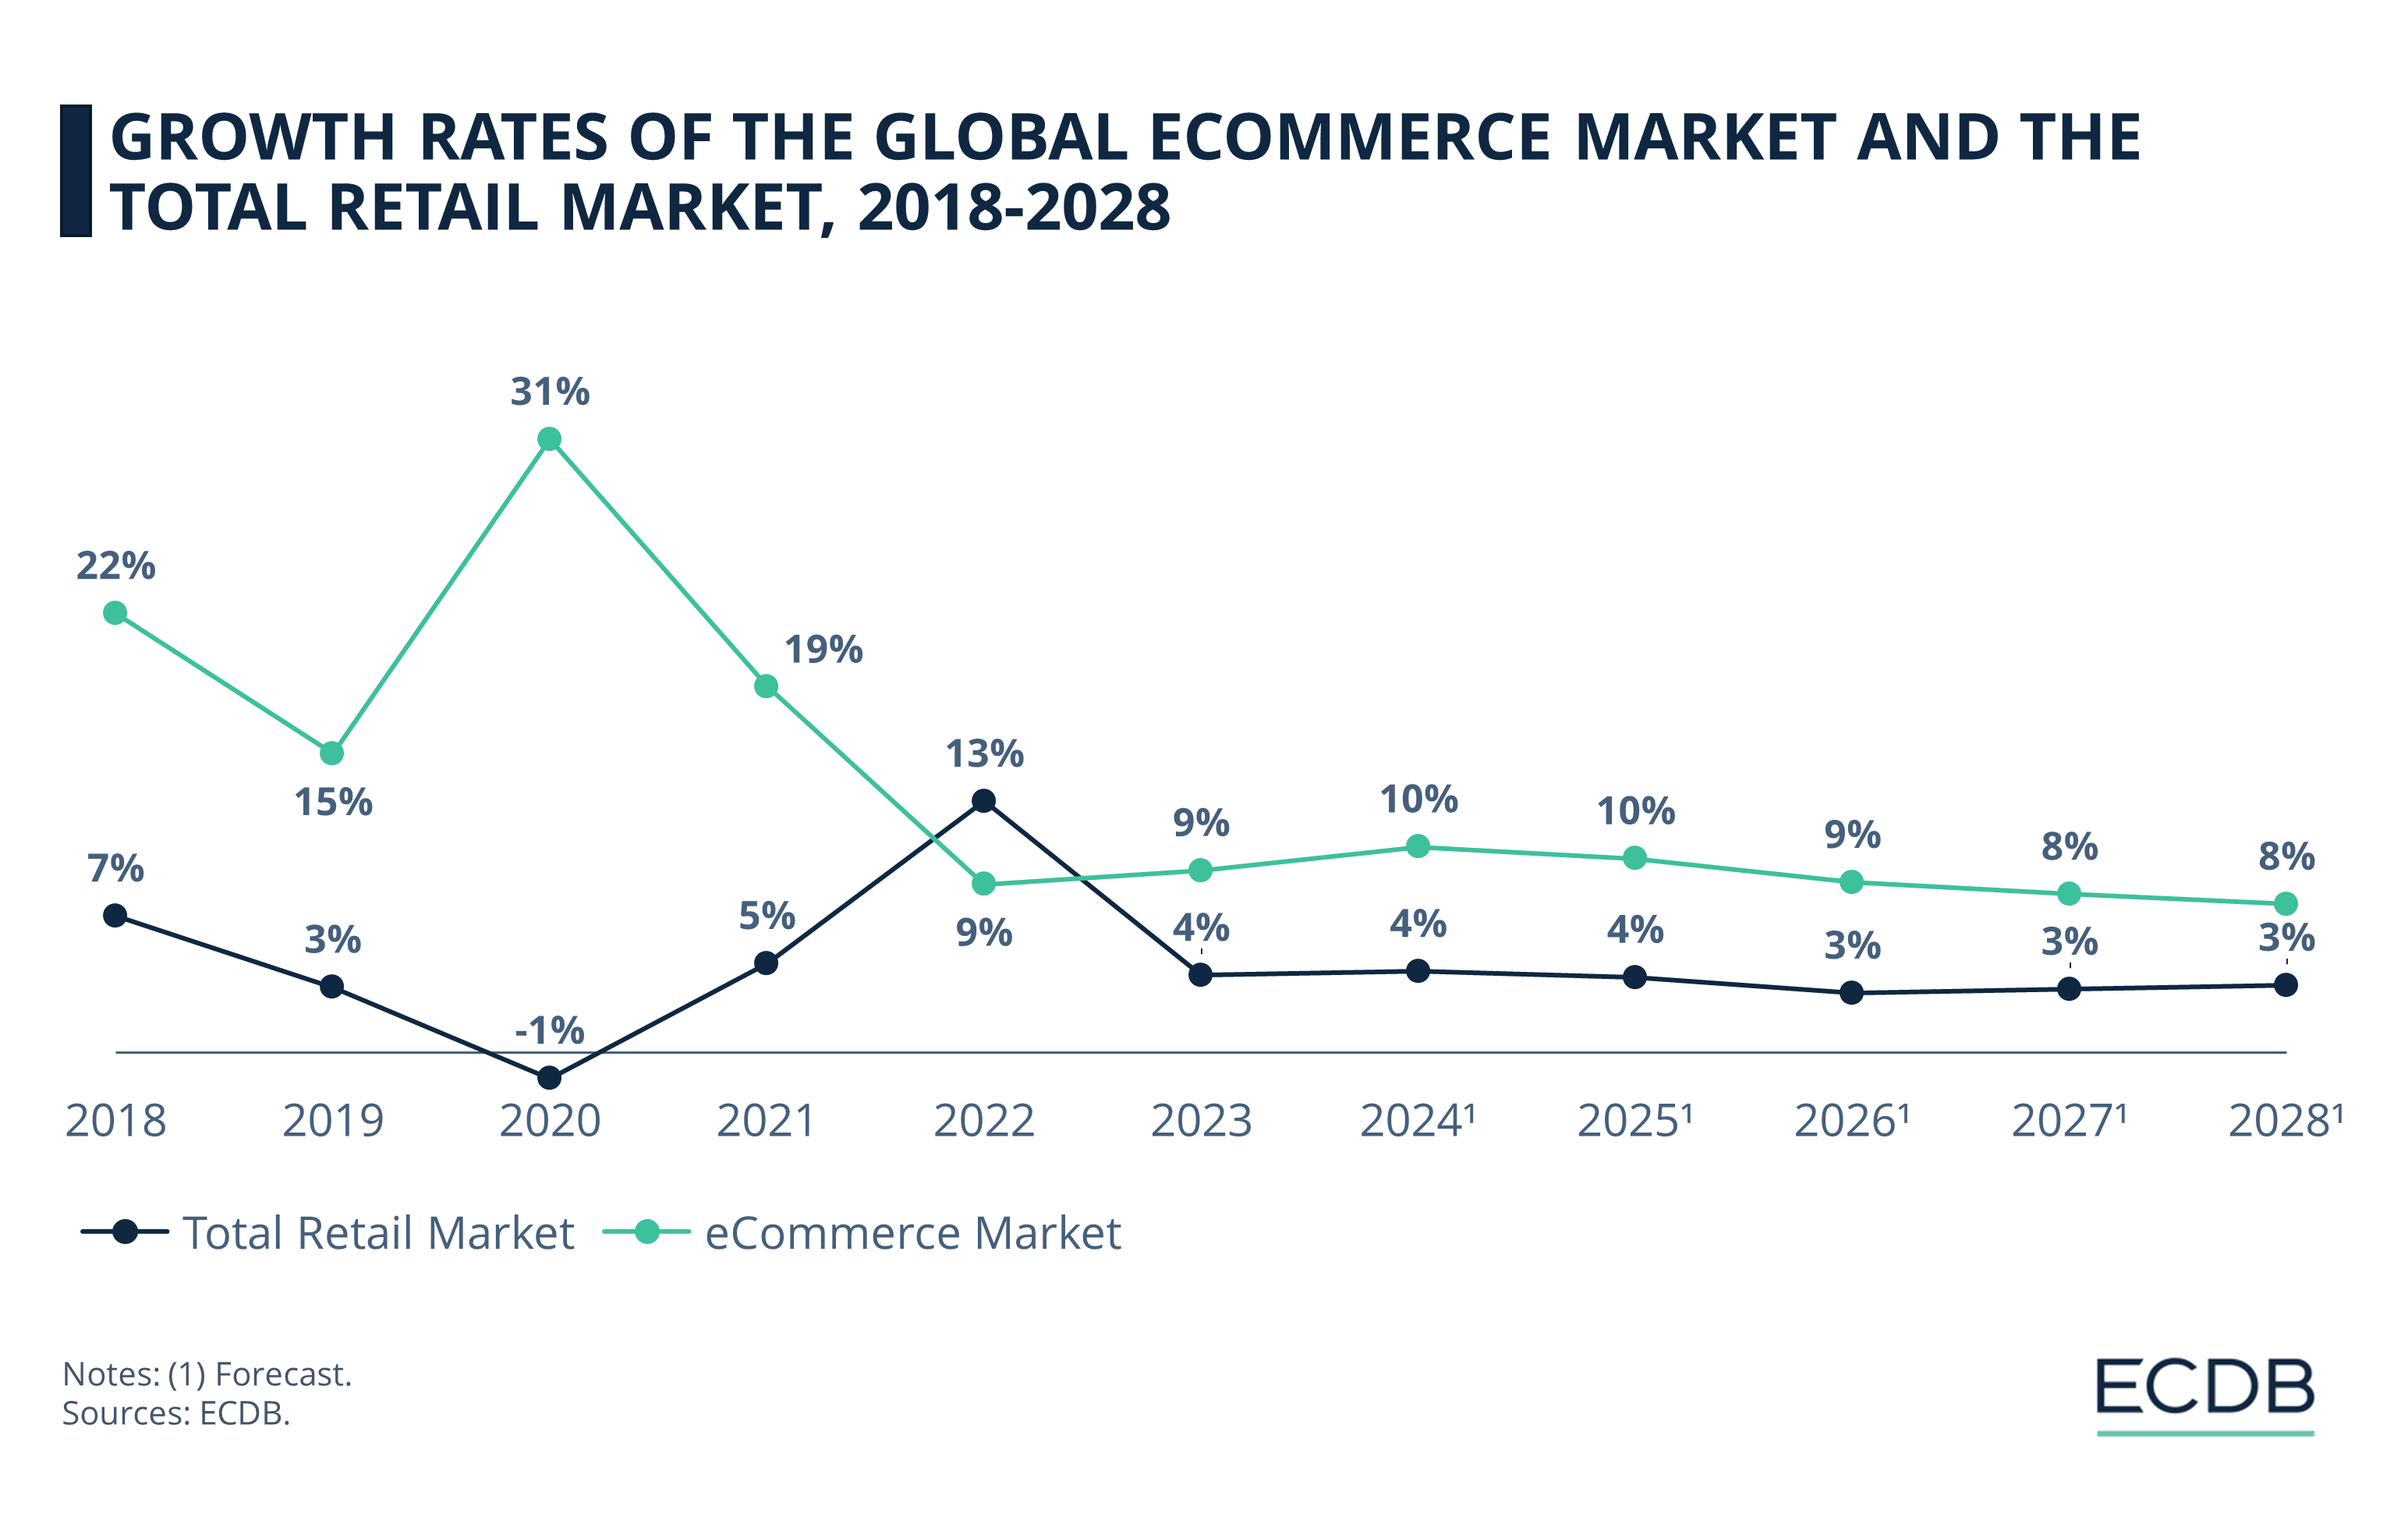 Growth Rates of the Global eCommerce Market and the Total Retail Market, 2018-2028